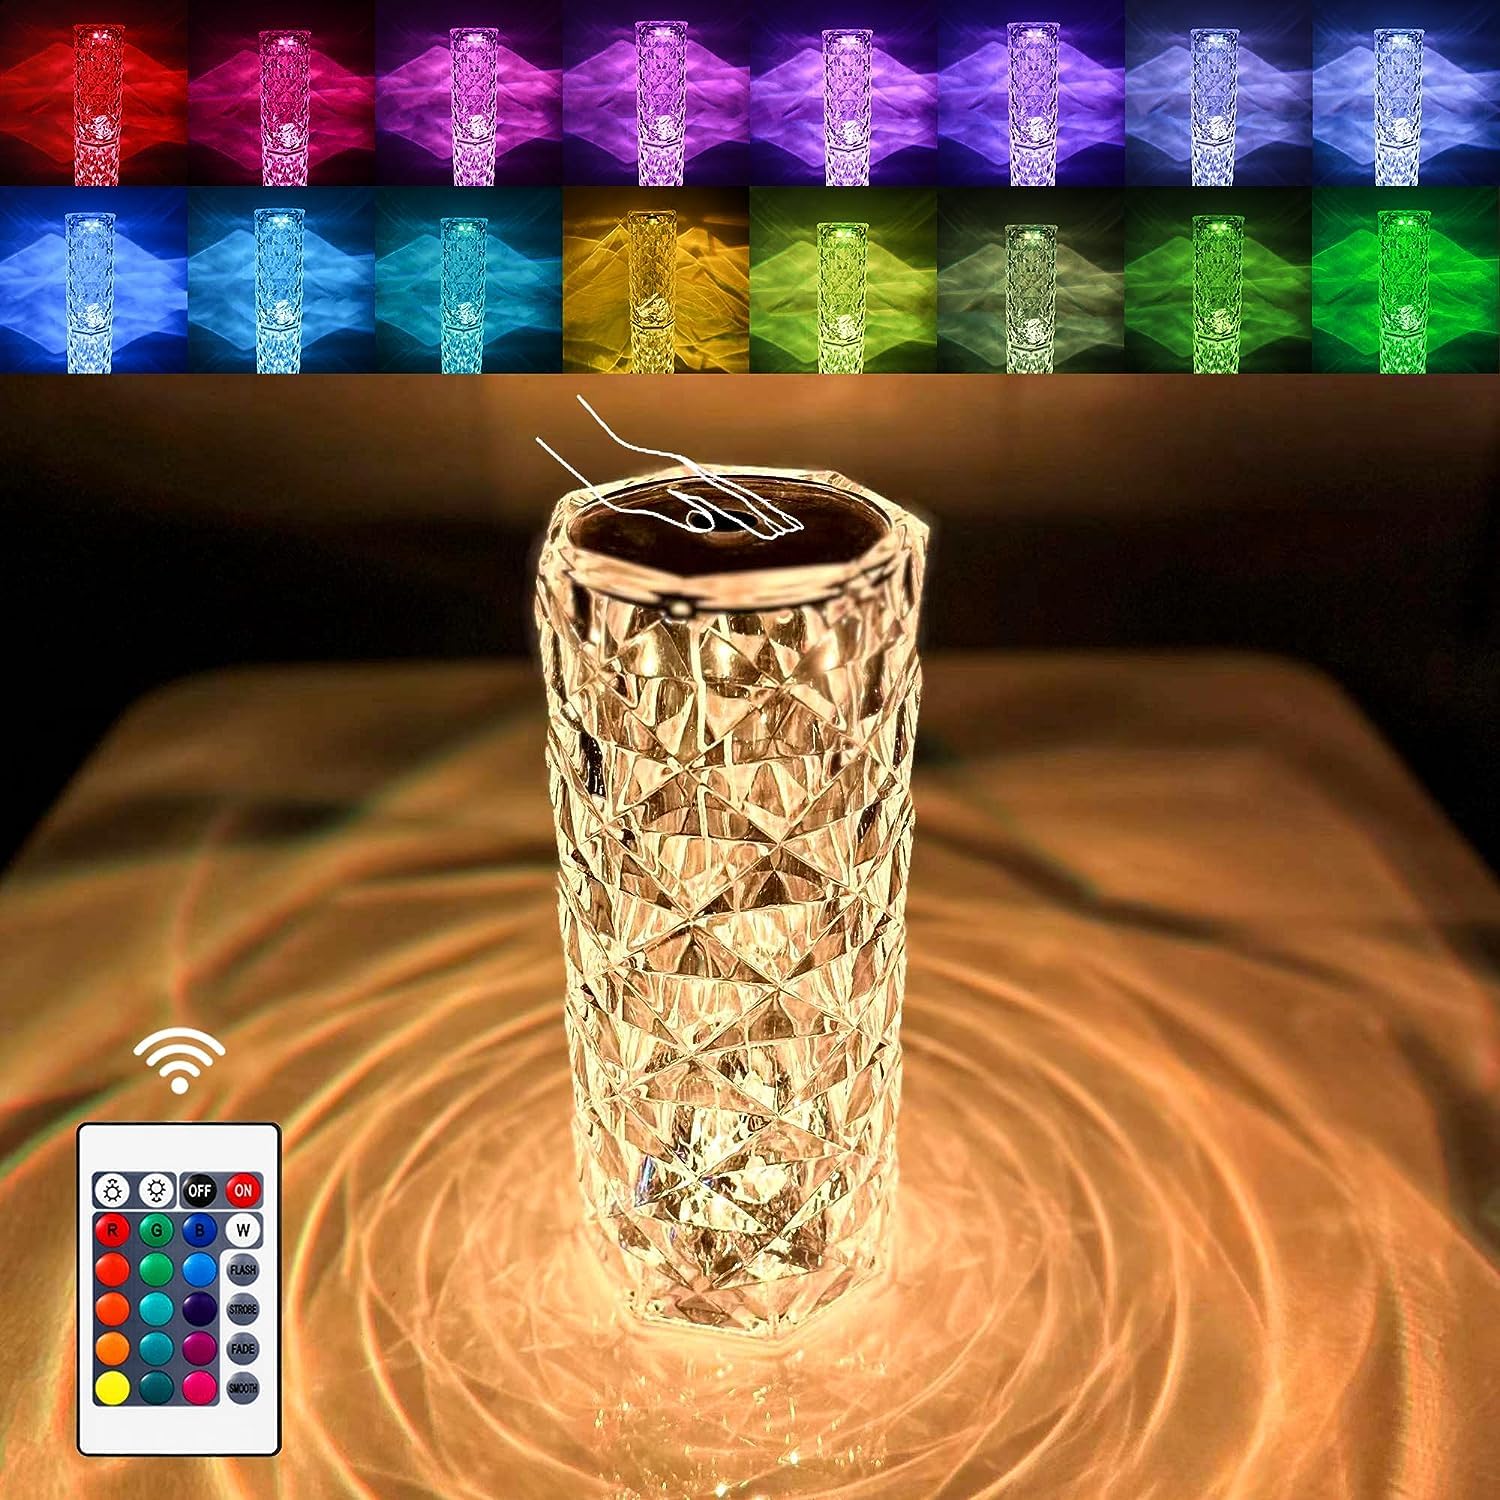 Crystal Lamp, Color Changing Rose Crystal Diamond Table Lamp, USB Rechargeable Touch Bedside Lamp Night Light with Remote Control